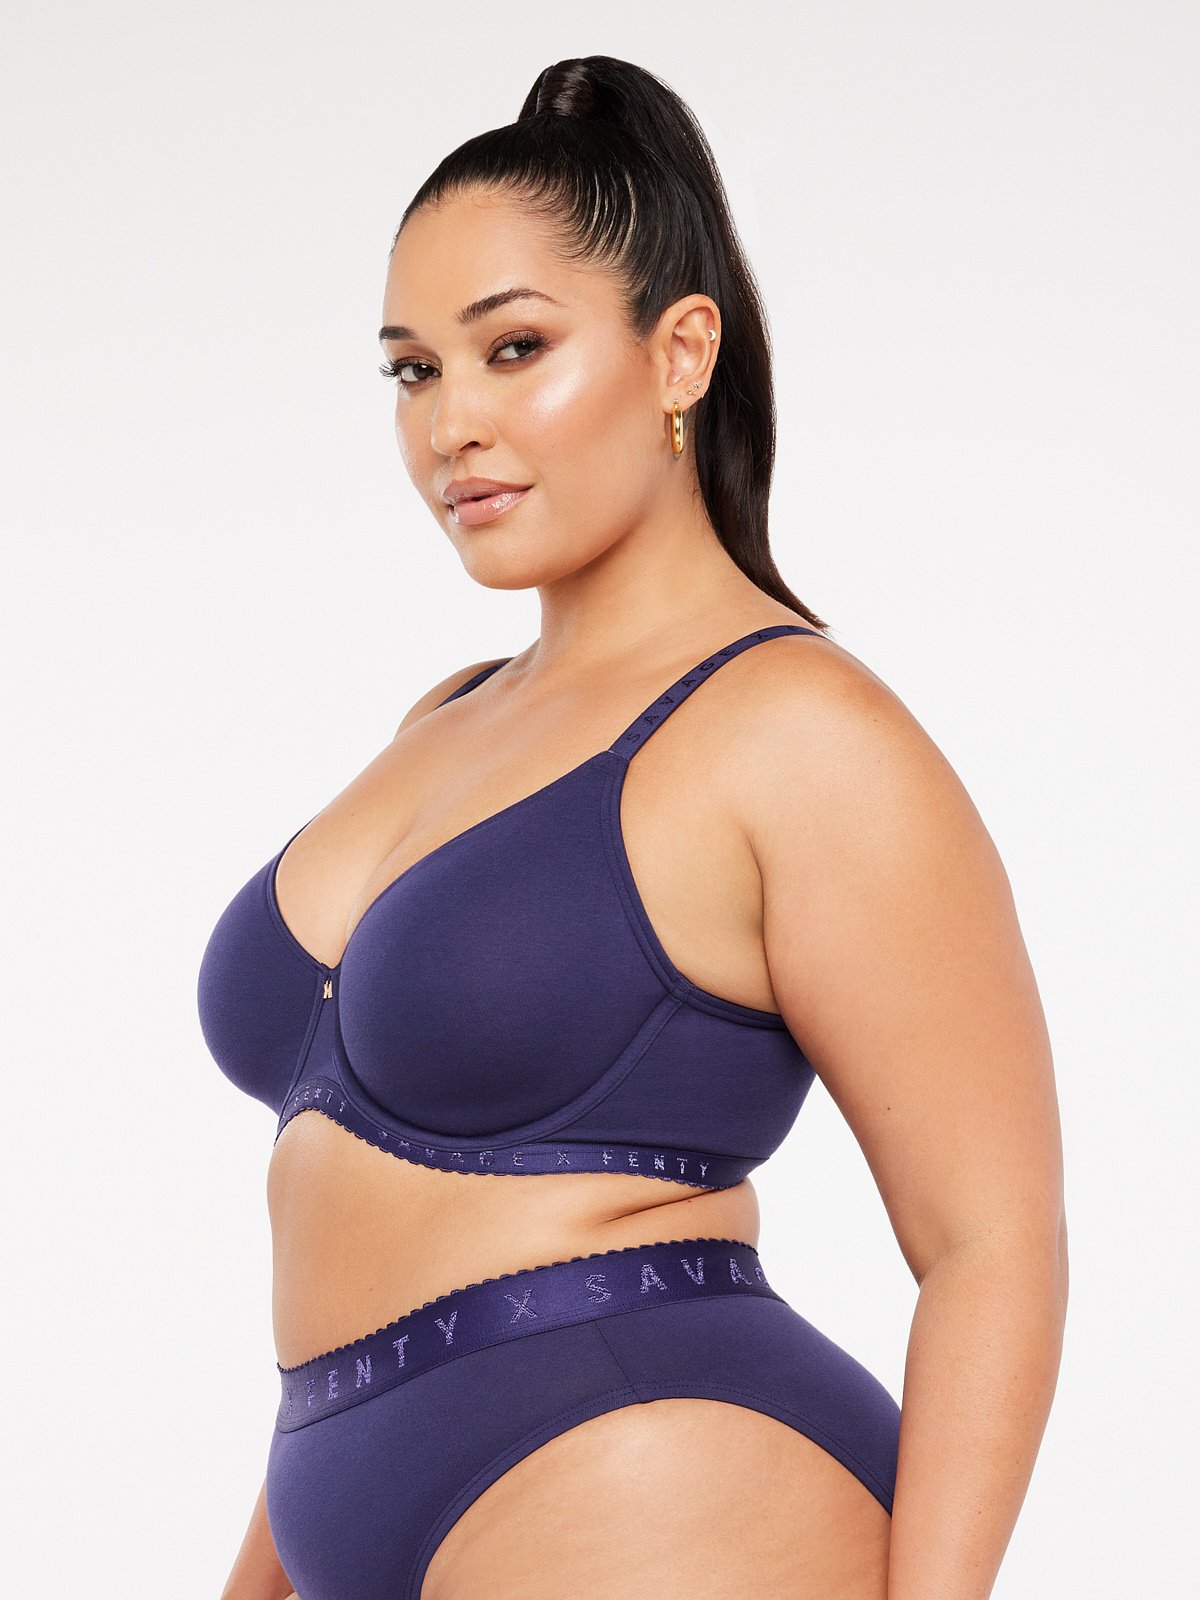 Savage X Gently Solid Blue Underwire T-shirt Bra women's size 40H - $25 -  From Autumn